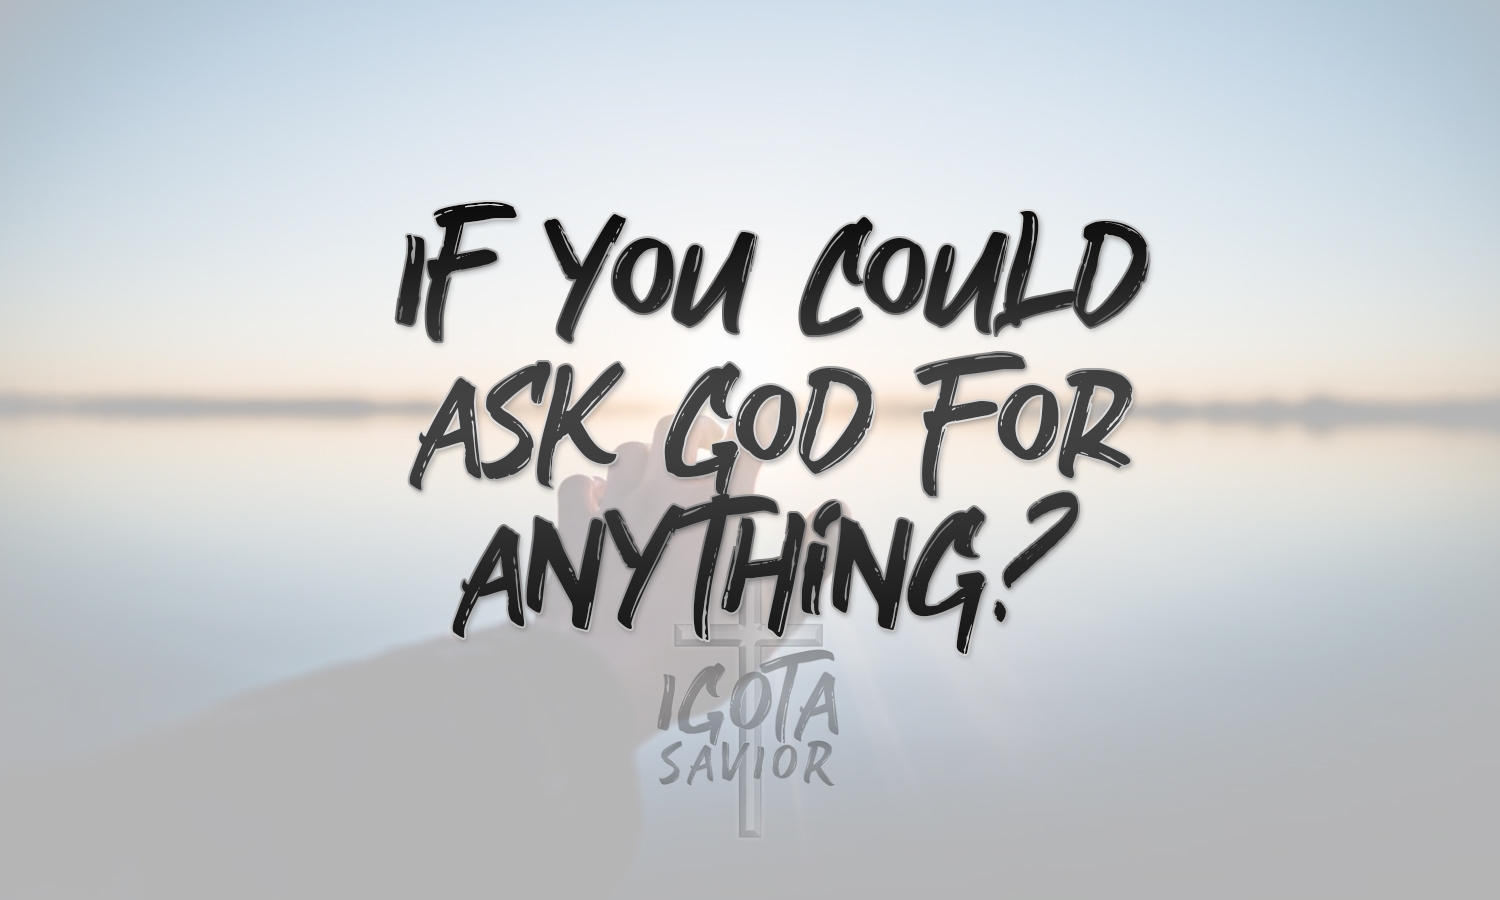 If You Could Ask God For Anything?